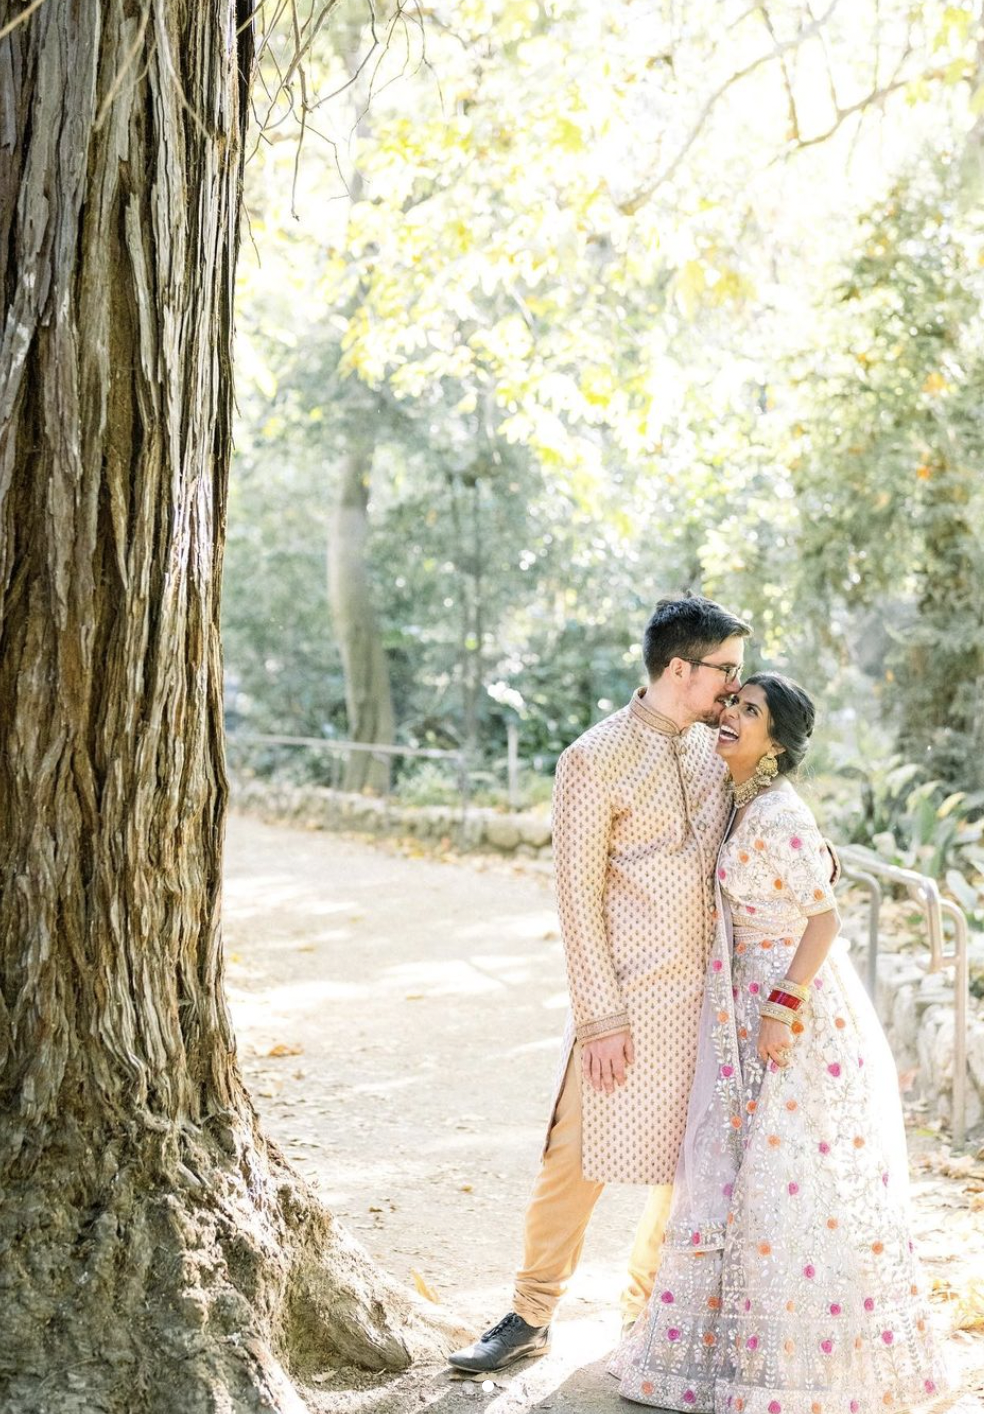 our indian bride chose natural and glowing makeup with a loose, low updo to showcase her gorgeous traditional indian bridal outfit